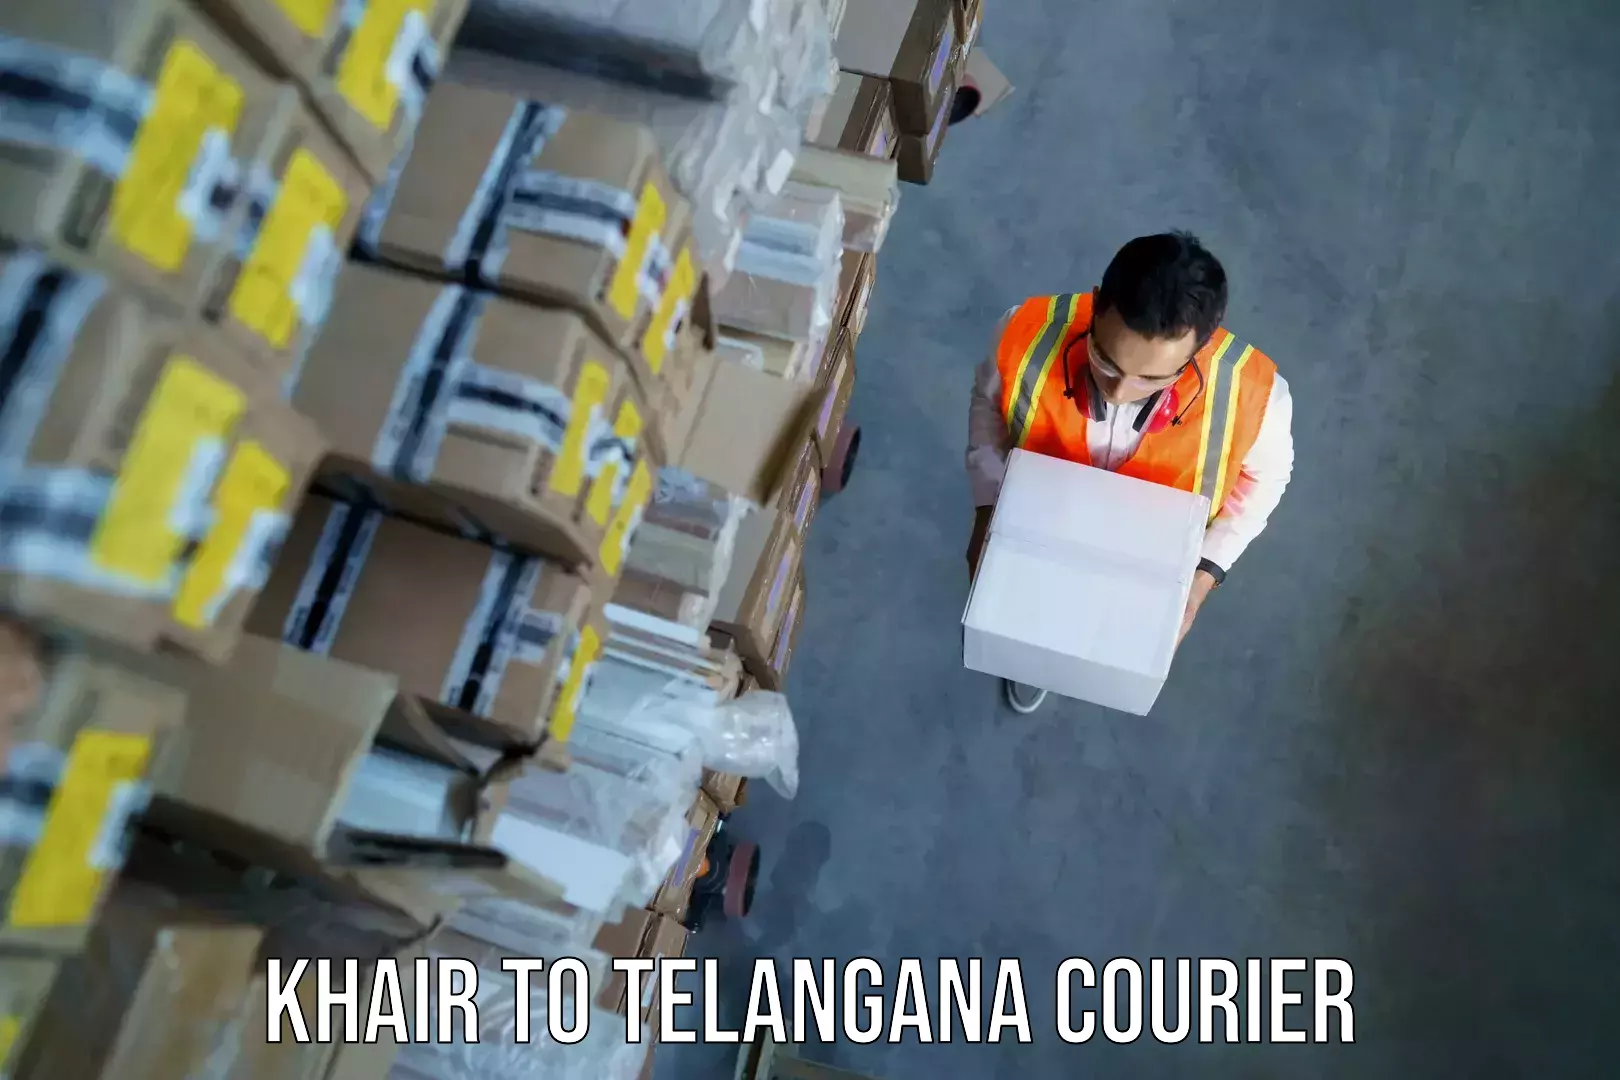 Baggage transport network Khair to Secunderabad